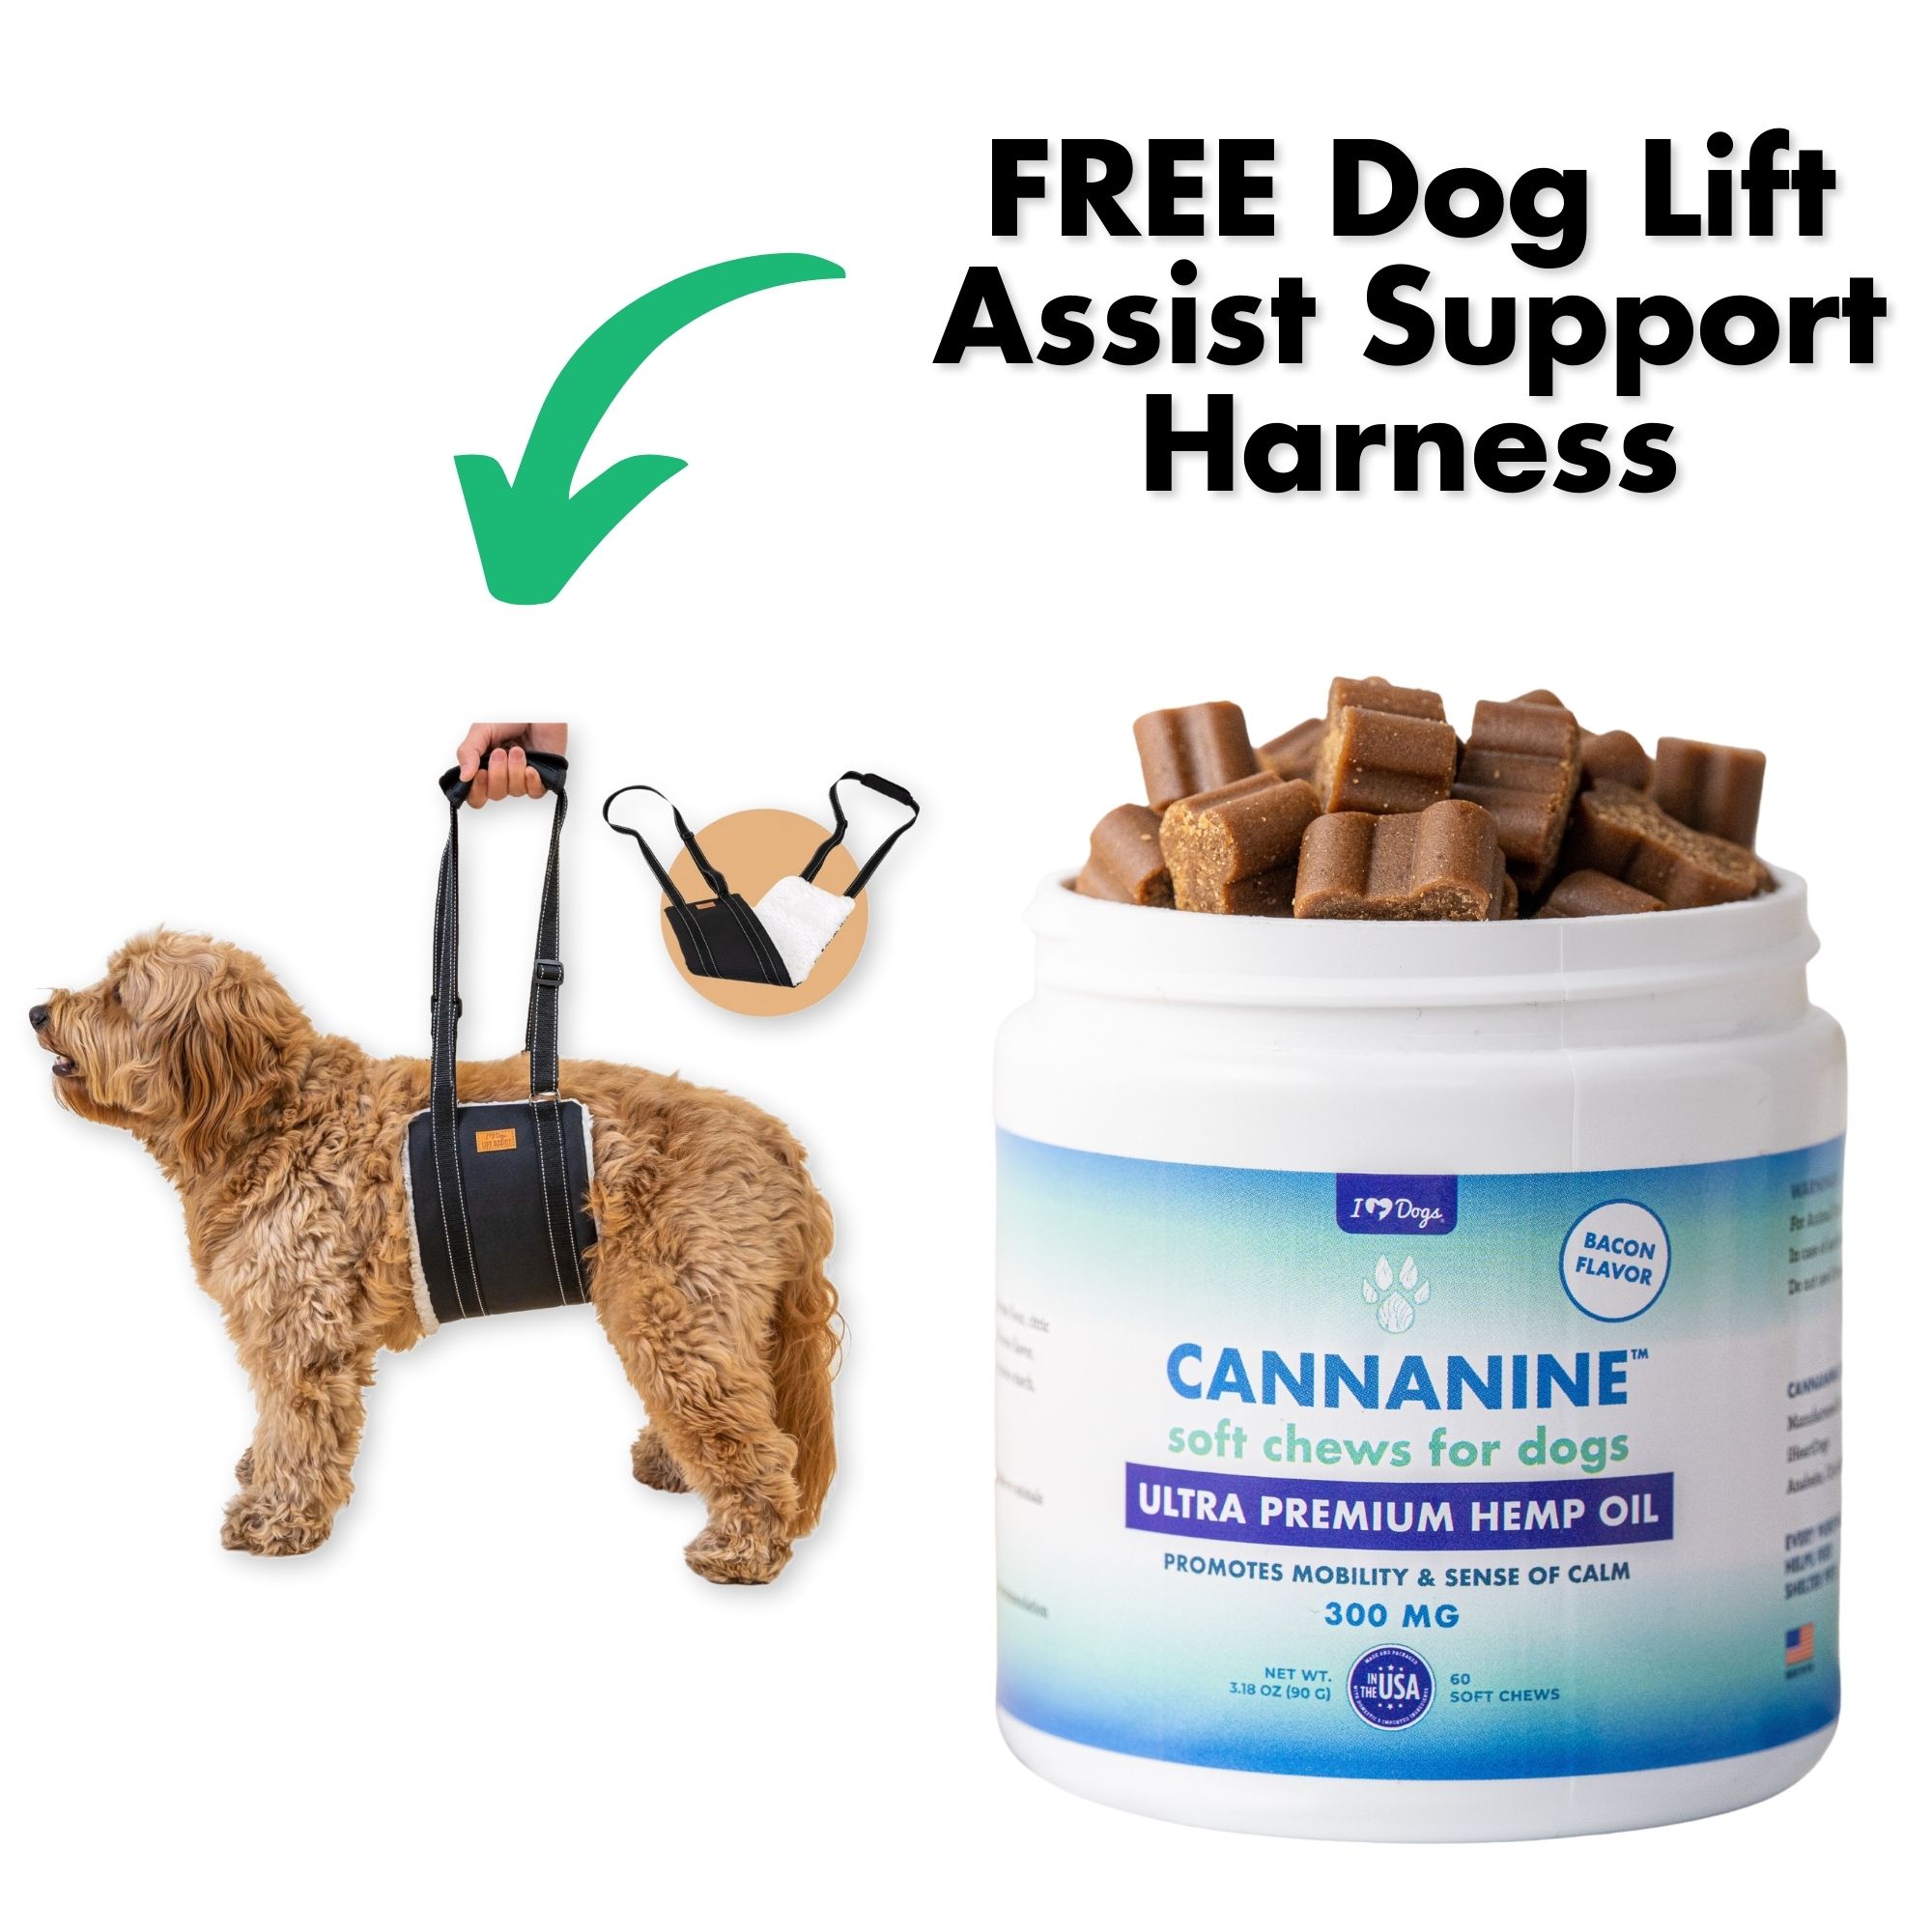 FREE Dog Lift Assist Support Harness – For Senior Dogs, Pet Support & Rehabilitation Sling Lift  With Purchase of Bacon Flavored CBD Soft Chews For Dogs 300 mg.-  60 ct.